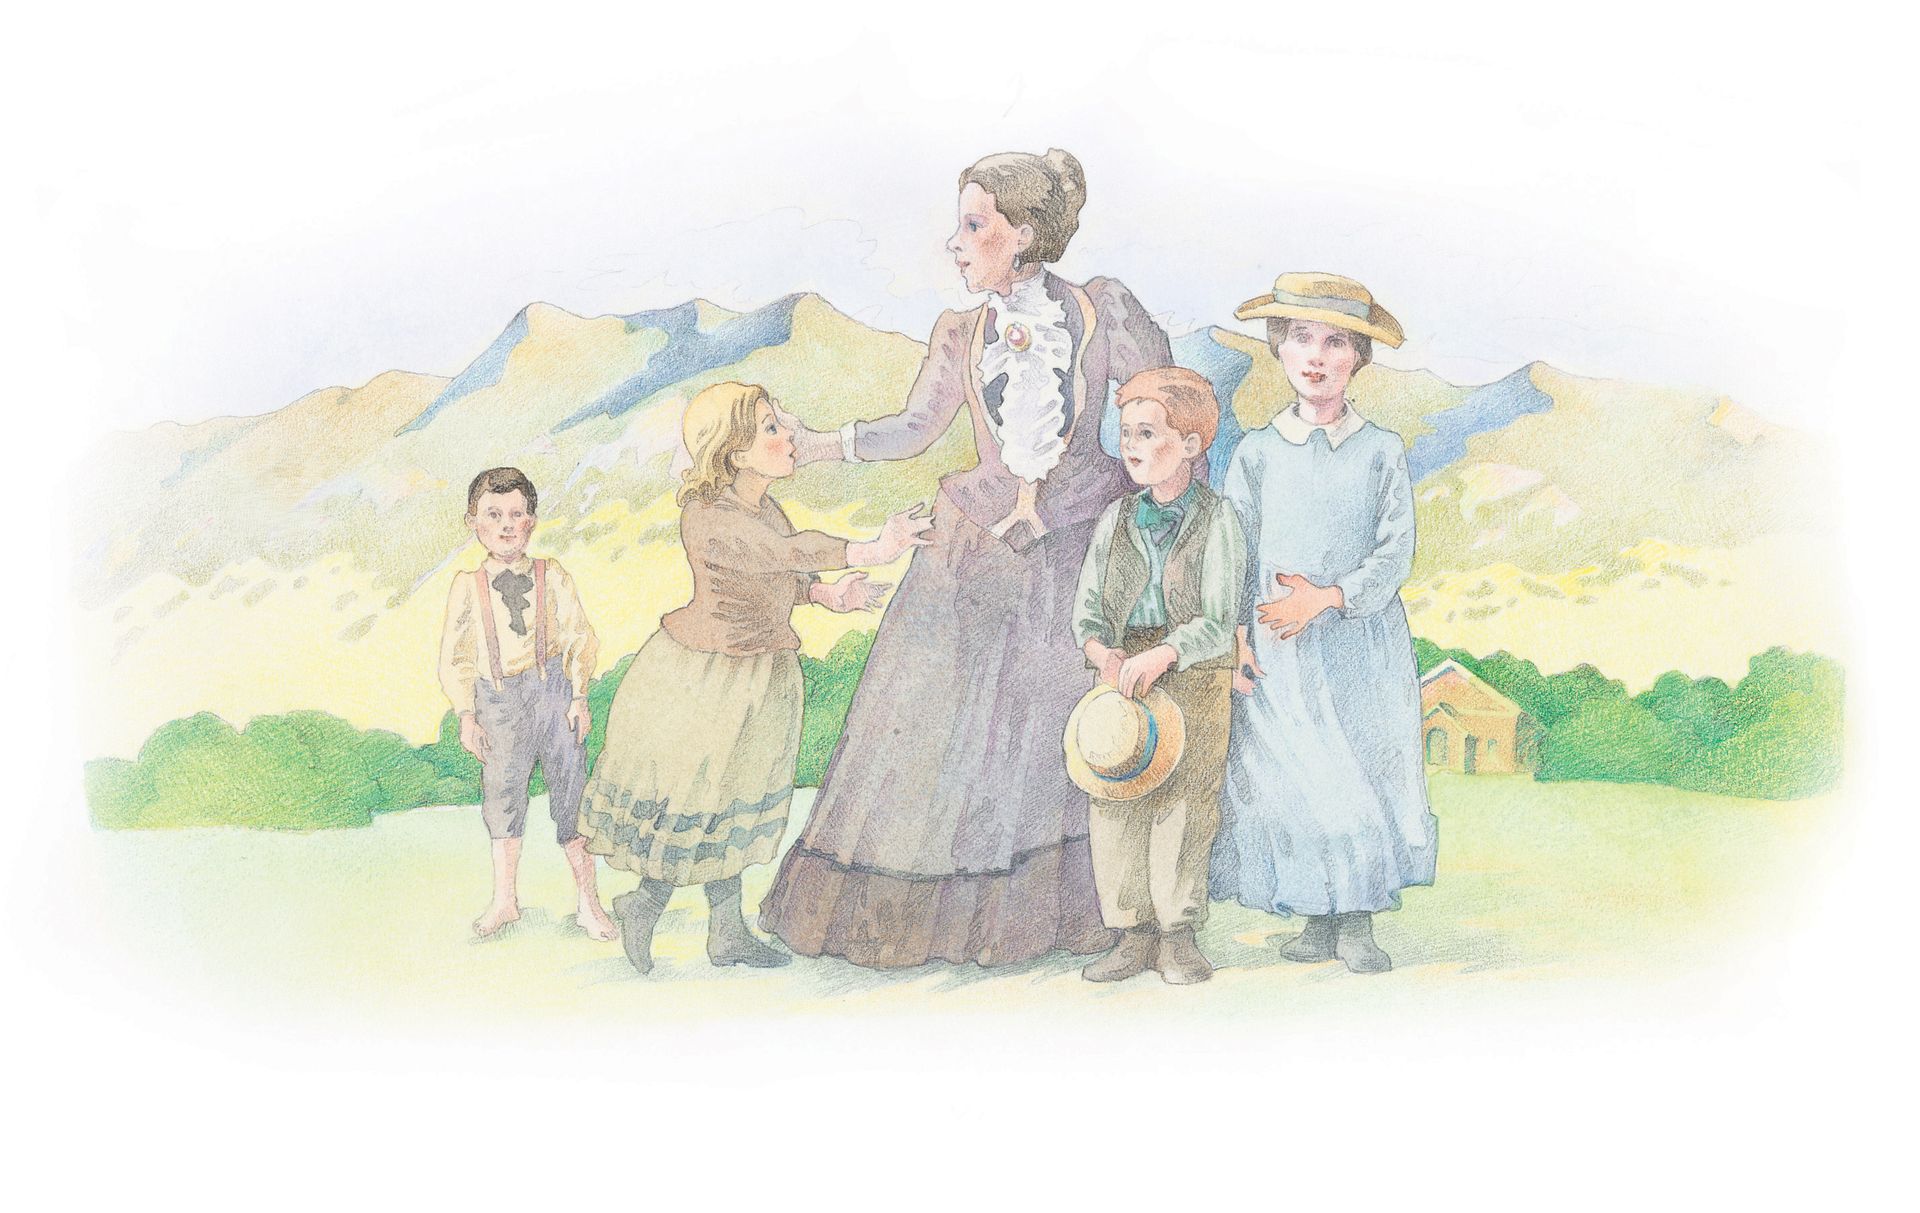 A woman and children in period dress standing together in a meadow. From the Children’s Songbook, page 256, “We Welcome You”; watercolor illustration by Richard Hull.